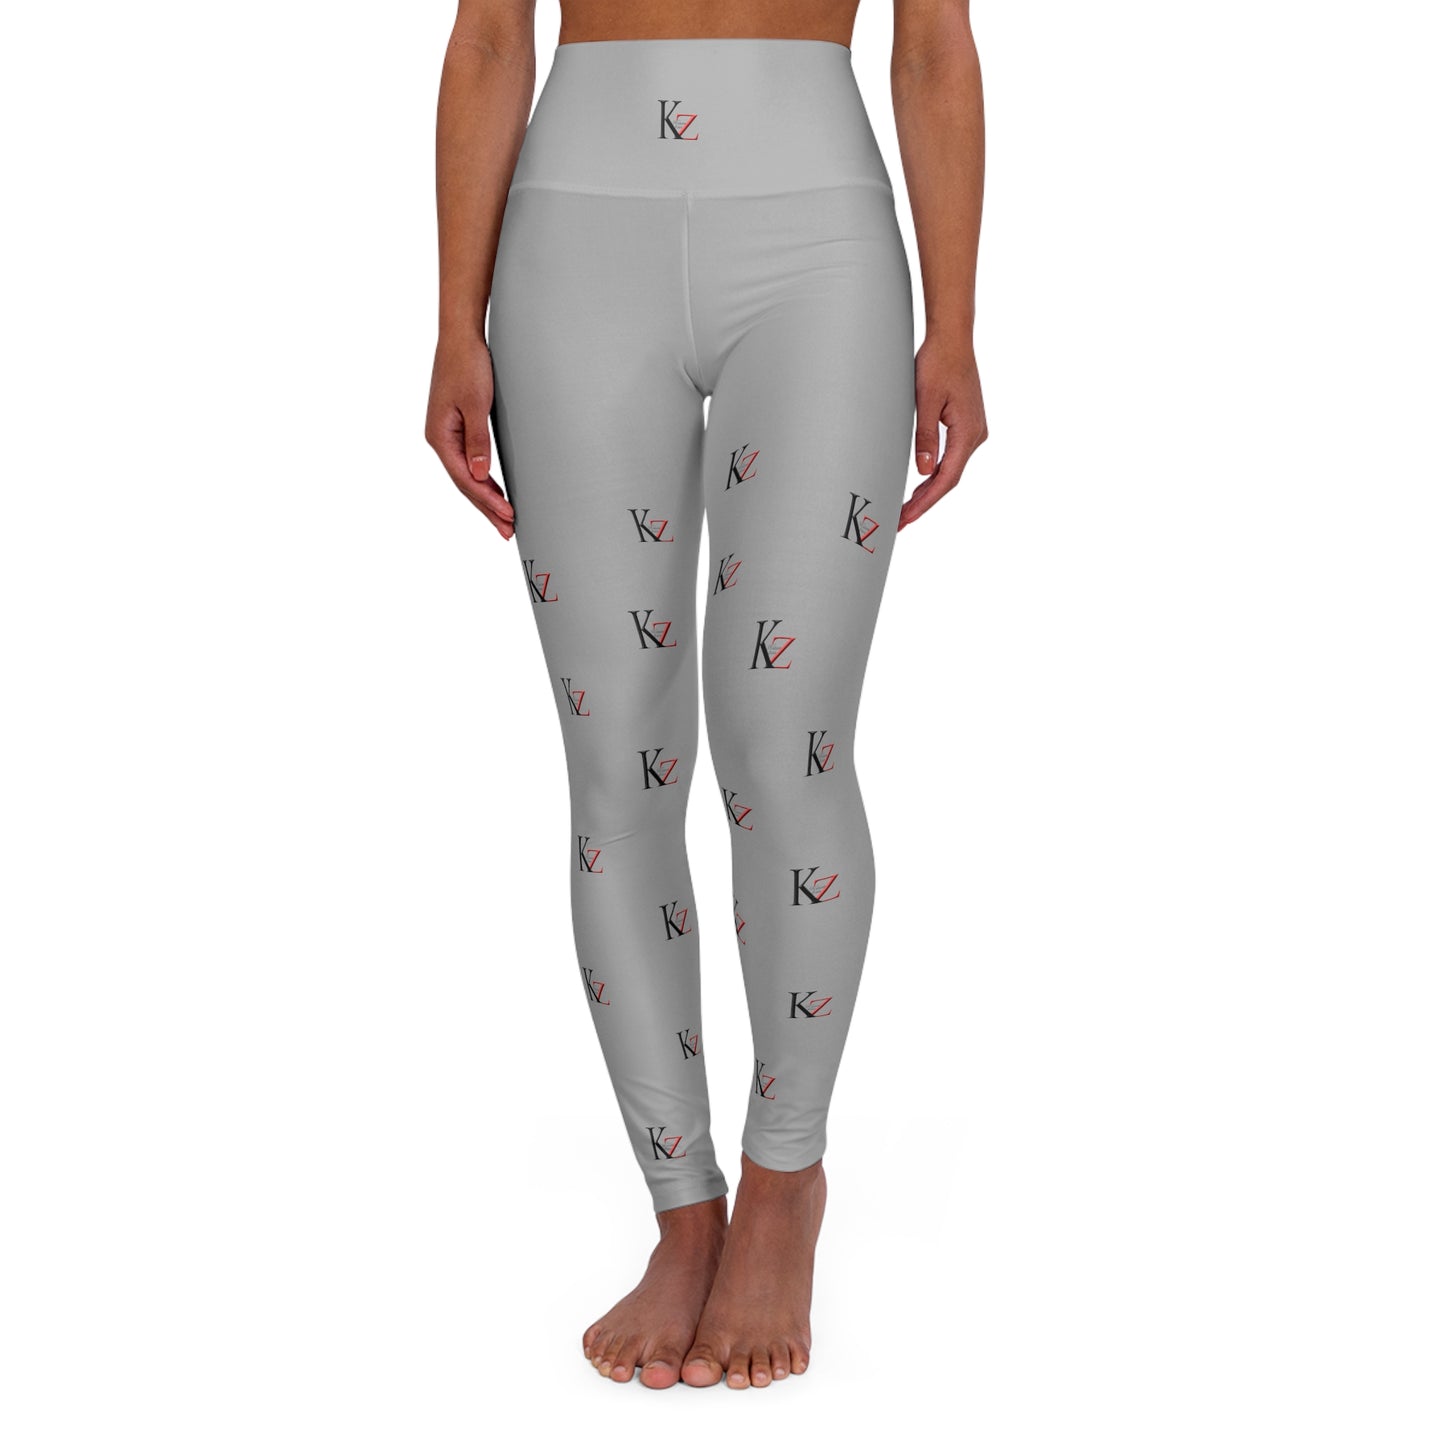 High Waisted  KZ monogram Leggings (Light Gray)) For an optimal fit, check out the KZ monogram Leggings. Crafted with stretchy fabric, these leggings feature a high-waisted and slim fit. Plus, the iconic Kalent Zaiz logo is featured around the waistband.